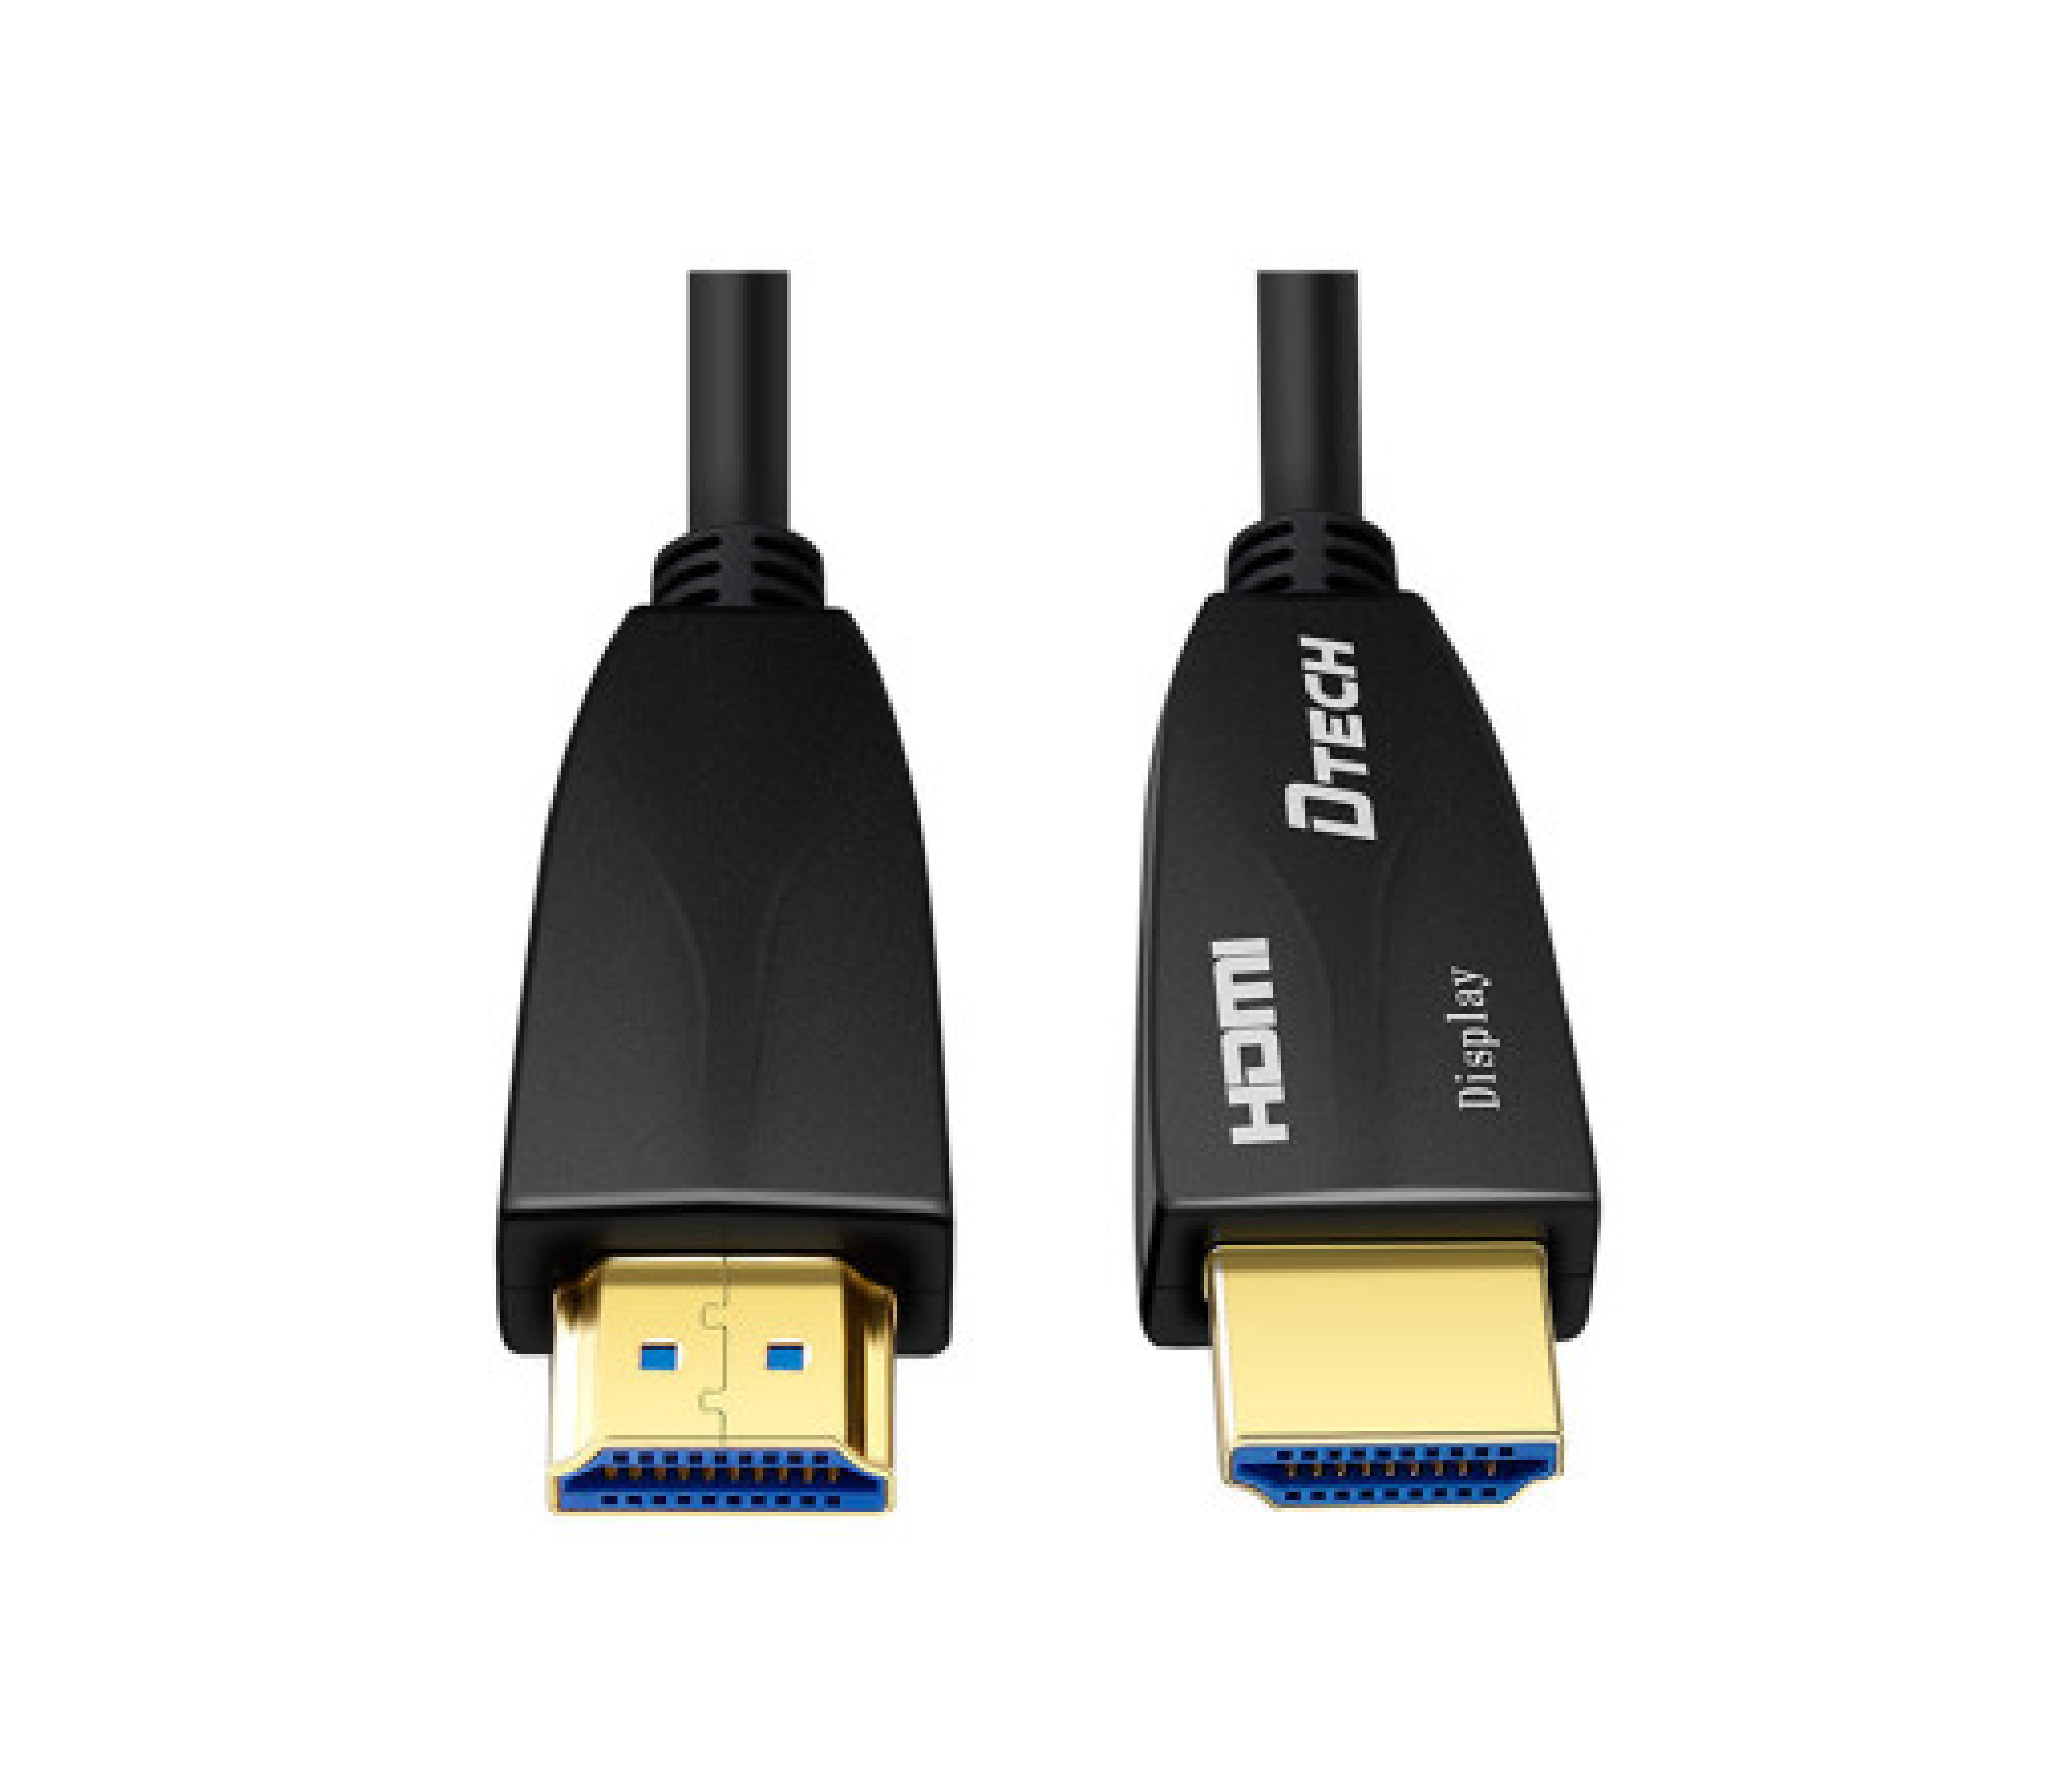 DTECH DT-HF2005  Cable HDMI